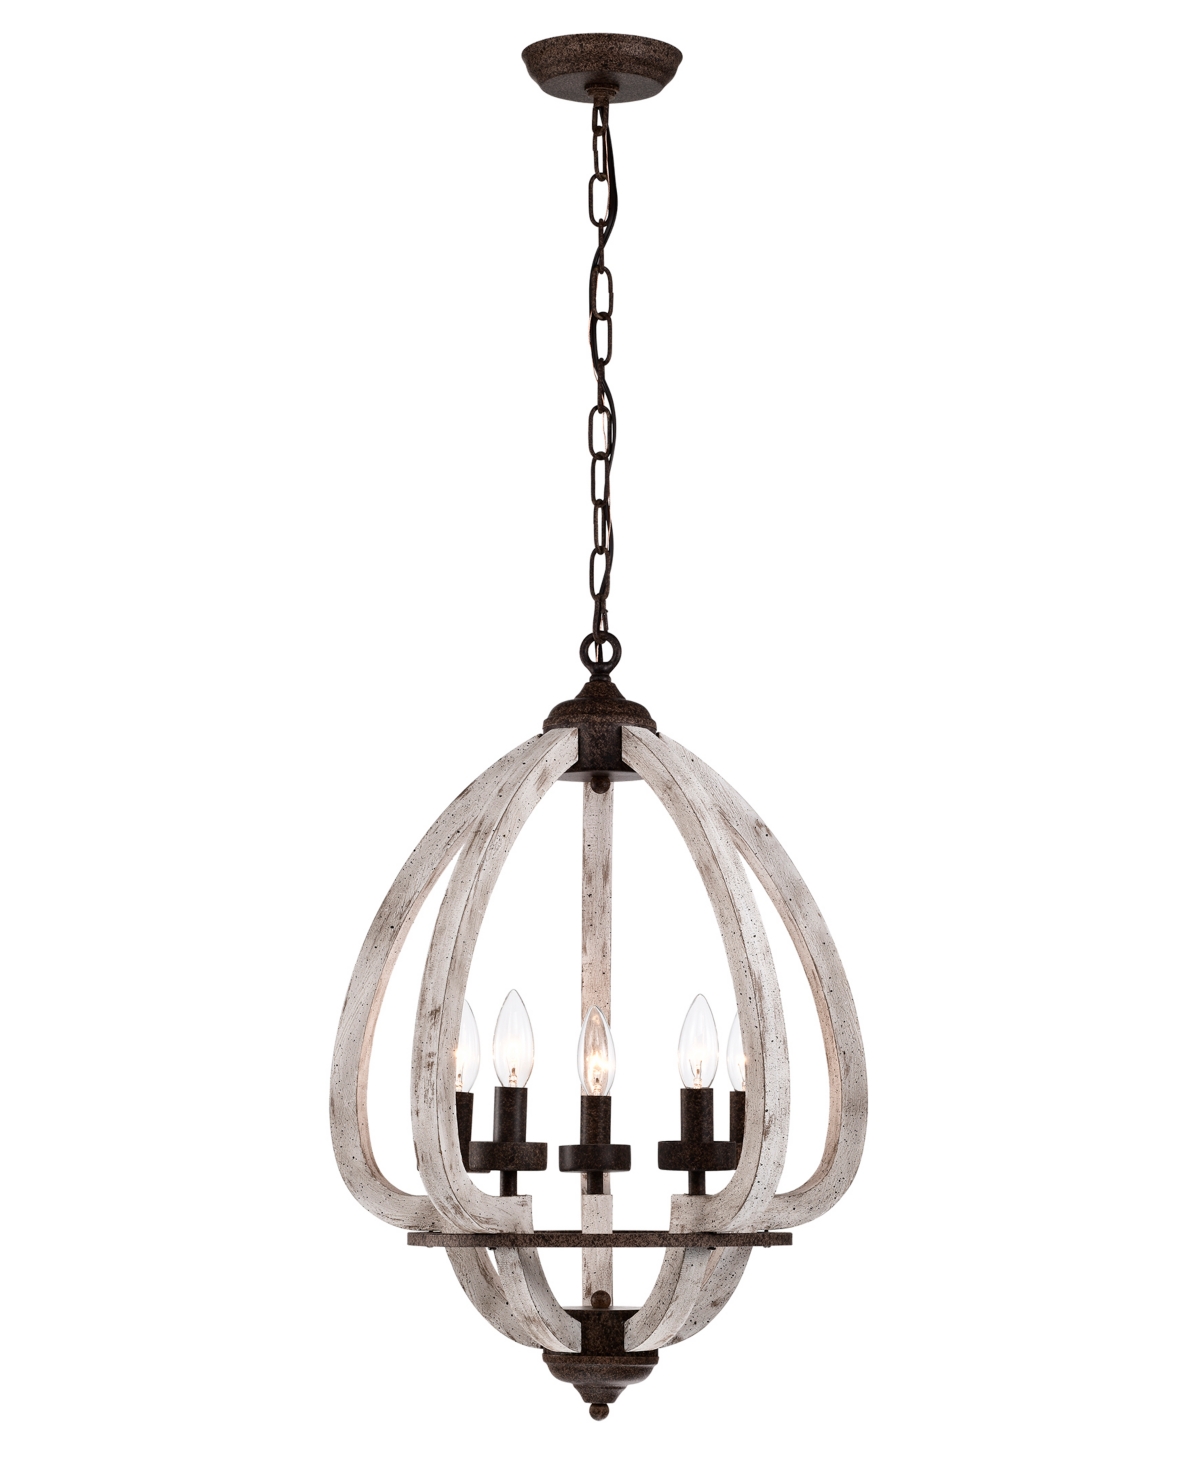 Home Accessories Nelly 18" Indoor Finish Chandelier With Light Kit In Rustic Brown And Weathered White